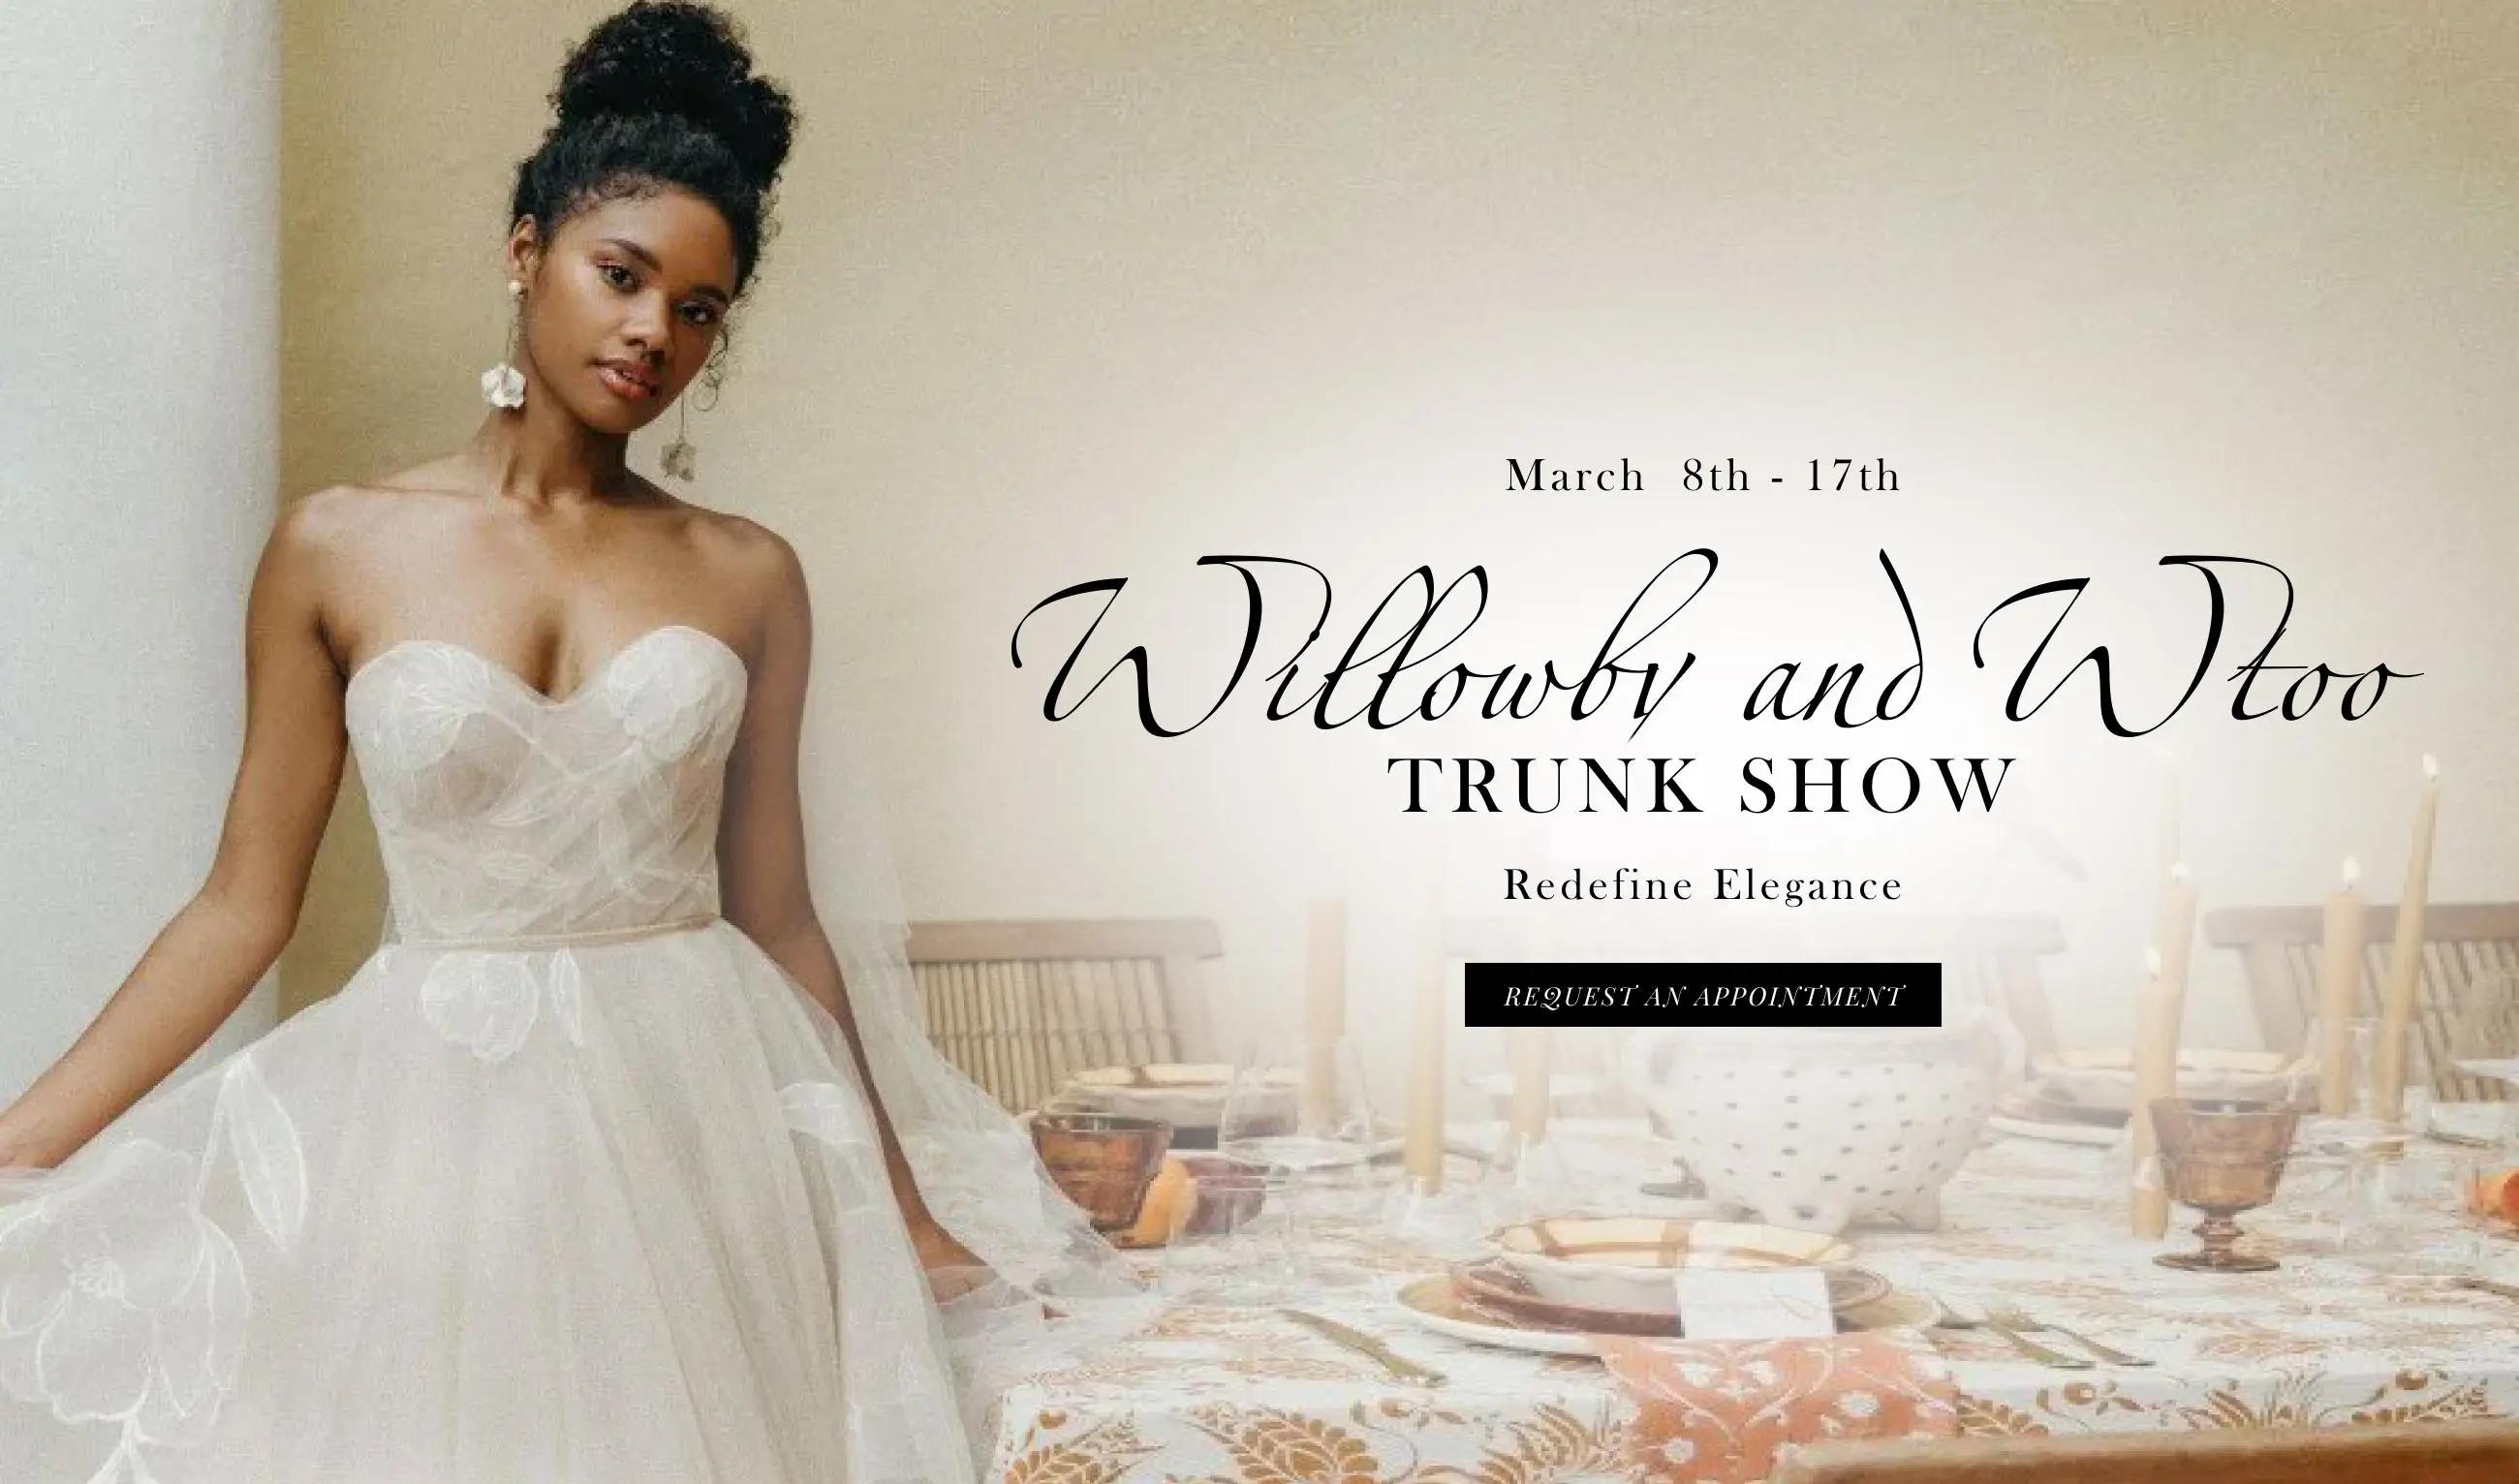 Desktop Willowby and Wtoo Trunk Show Banner